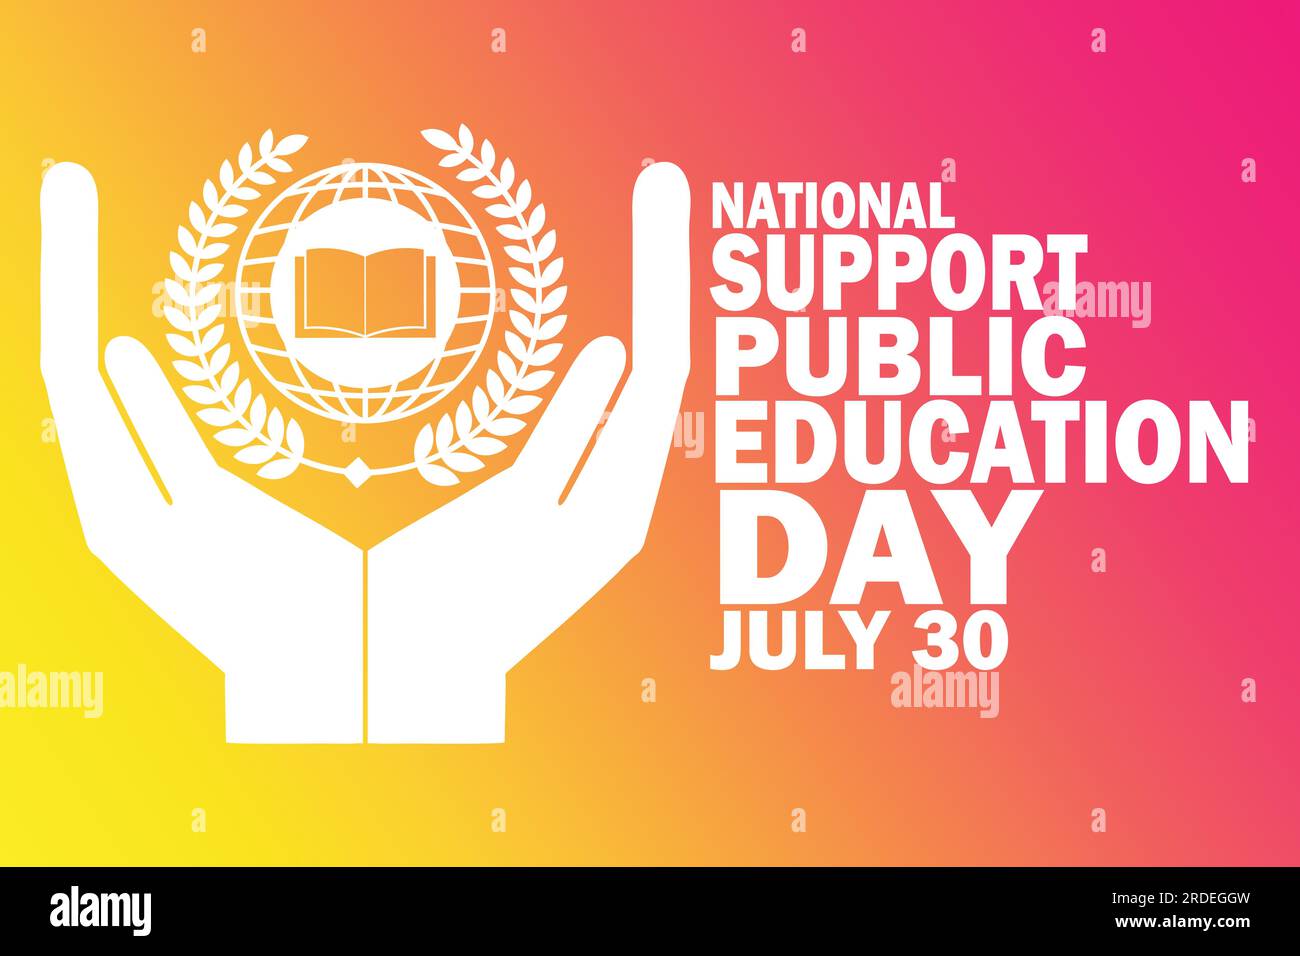 National Support Public Education Day Vector Template Design Illustration. July 30. Suitable for greeting card, poster and banner Stock Vector